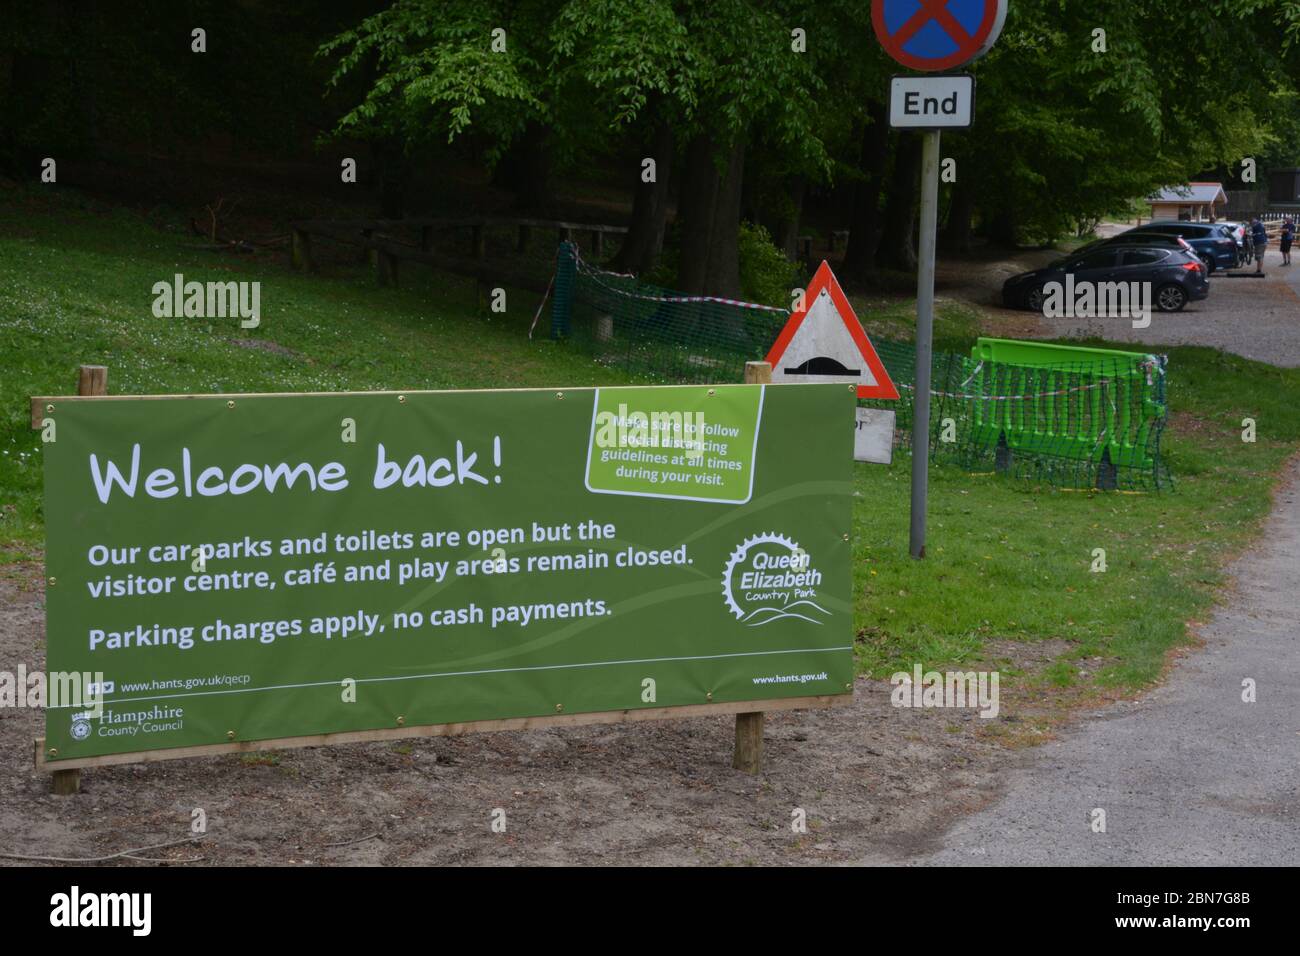 A sign welcoming visitors back to Queen Elizabeth Country Park near Petersfield, Hampshire, after the lifting of coronavirus lockdown restrictions on some leisure activities - including tennis, water sports, angling and golf. Stock Photo